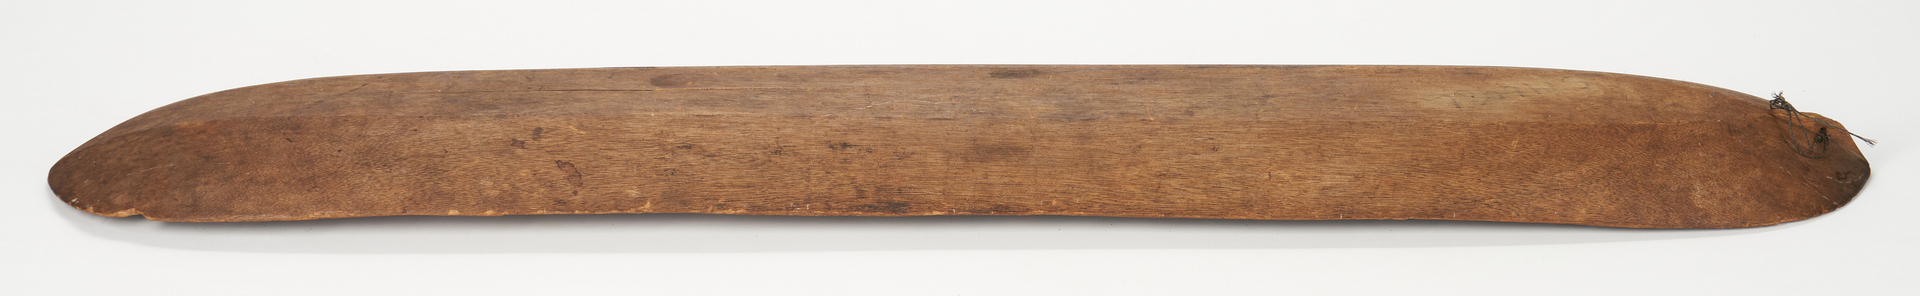 Lot 1053: 19th C. Hand Hewn Trencher, 60"L